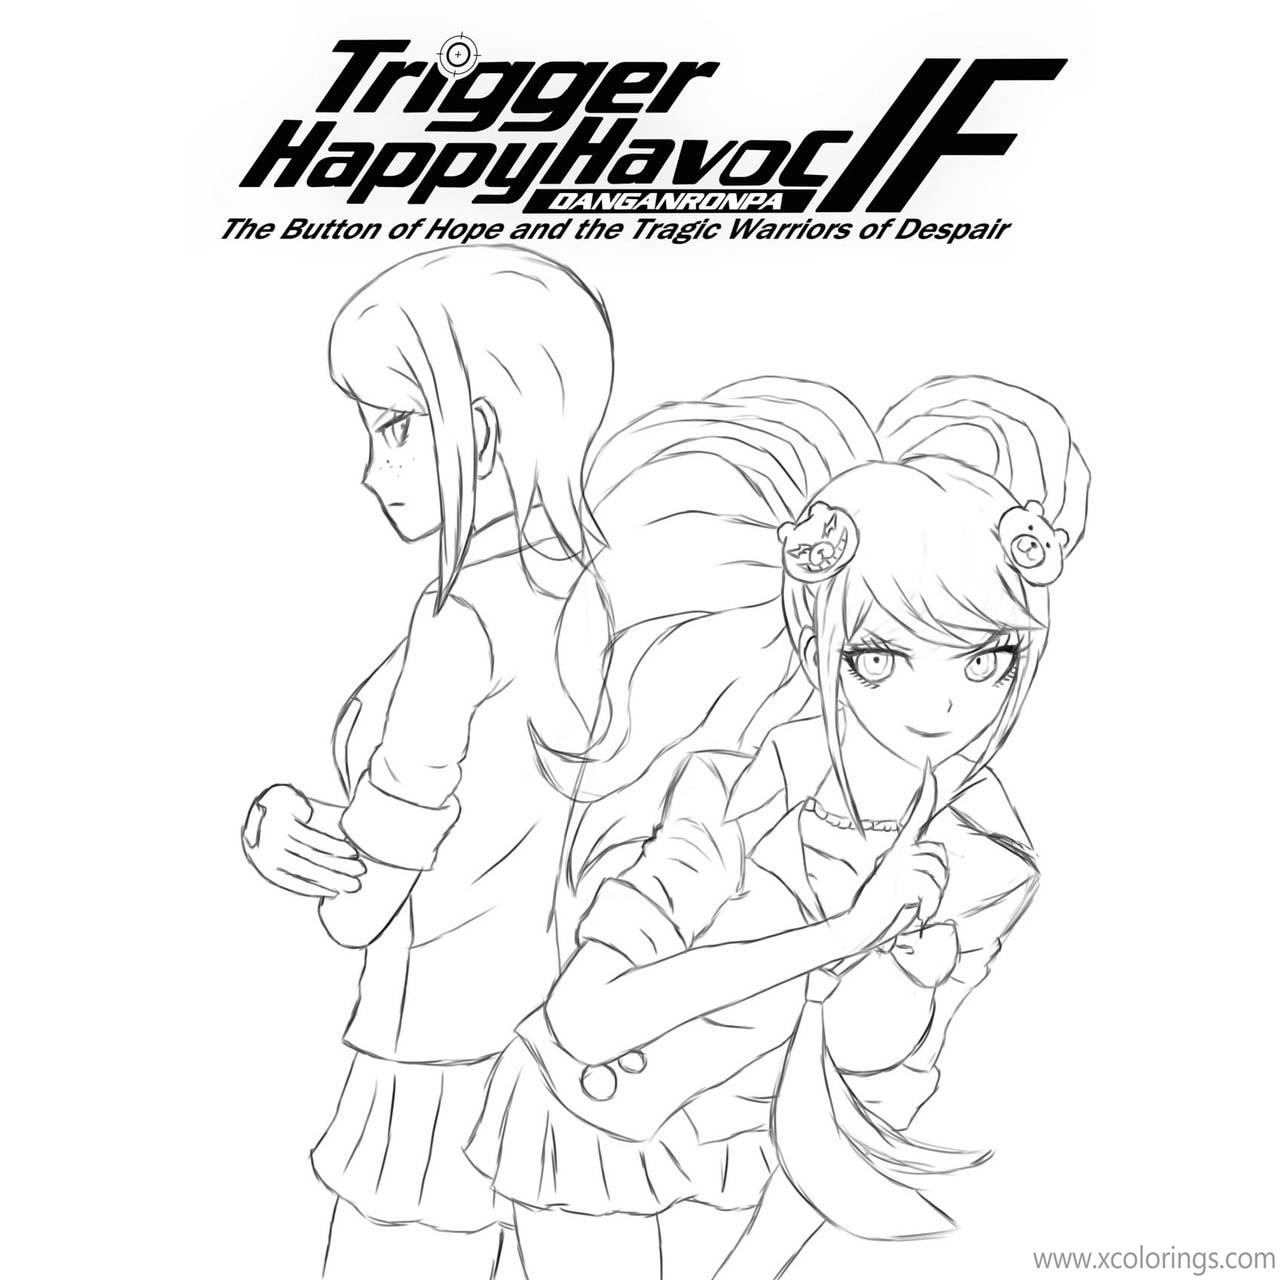 Free Danganronpa Coloring Pages Black and White printable